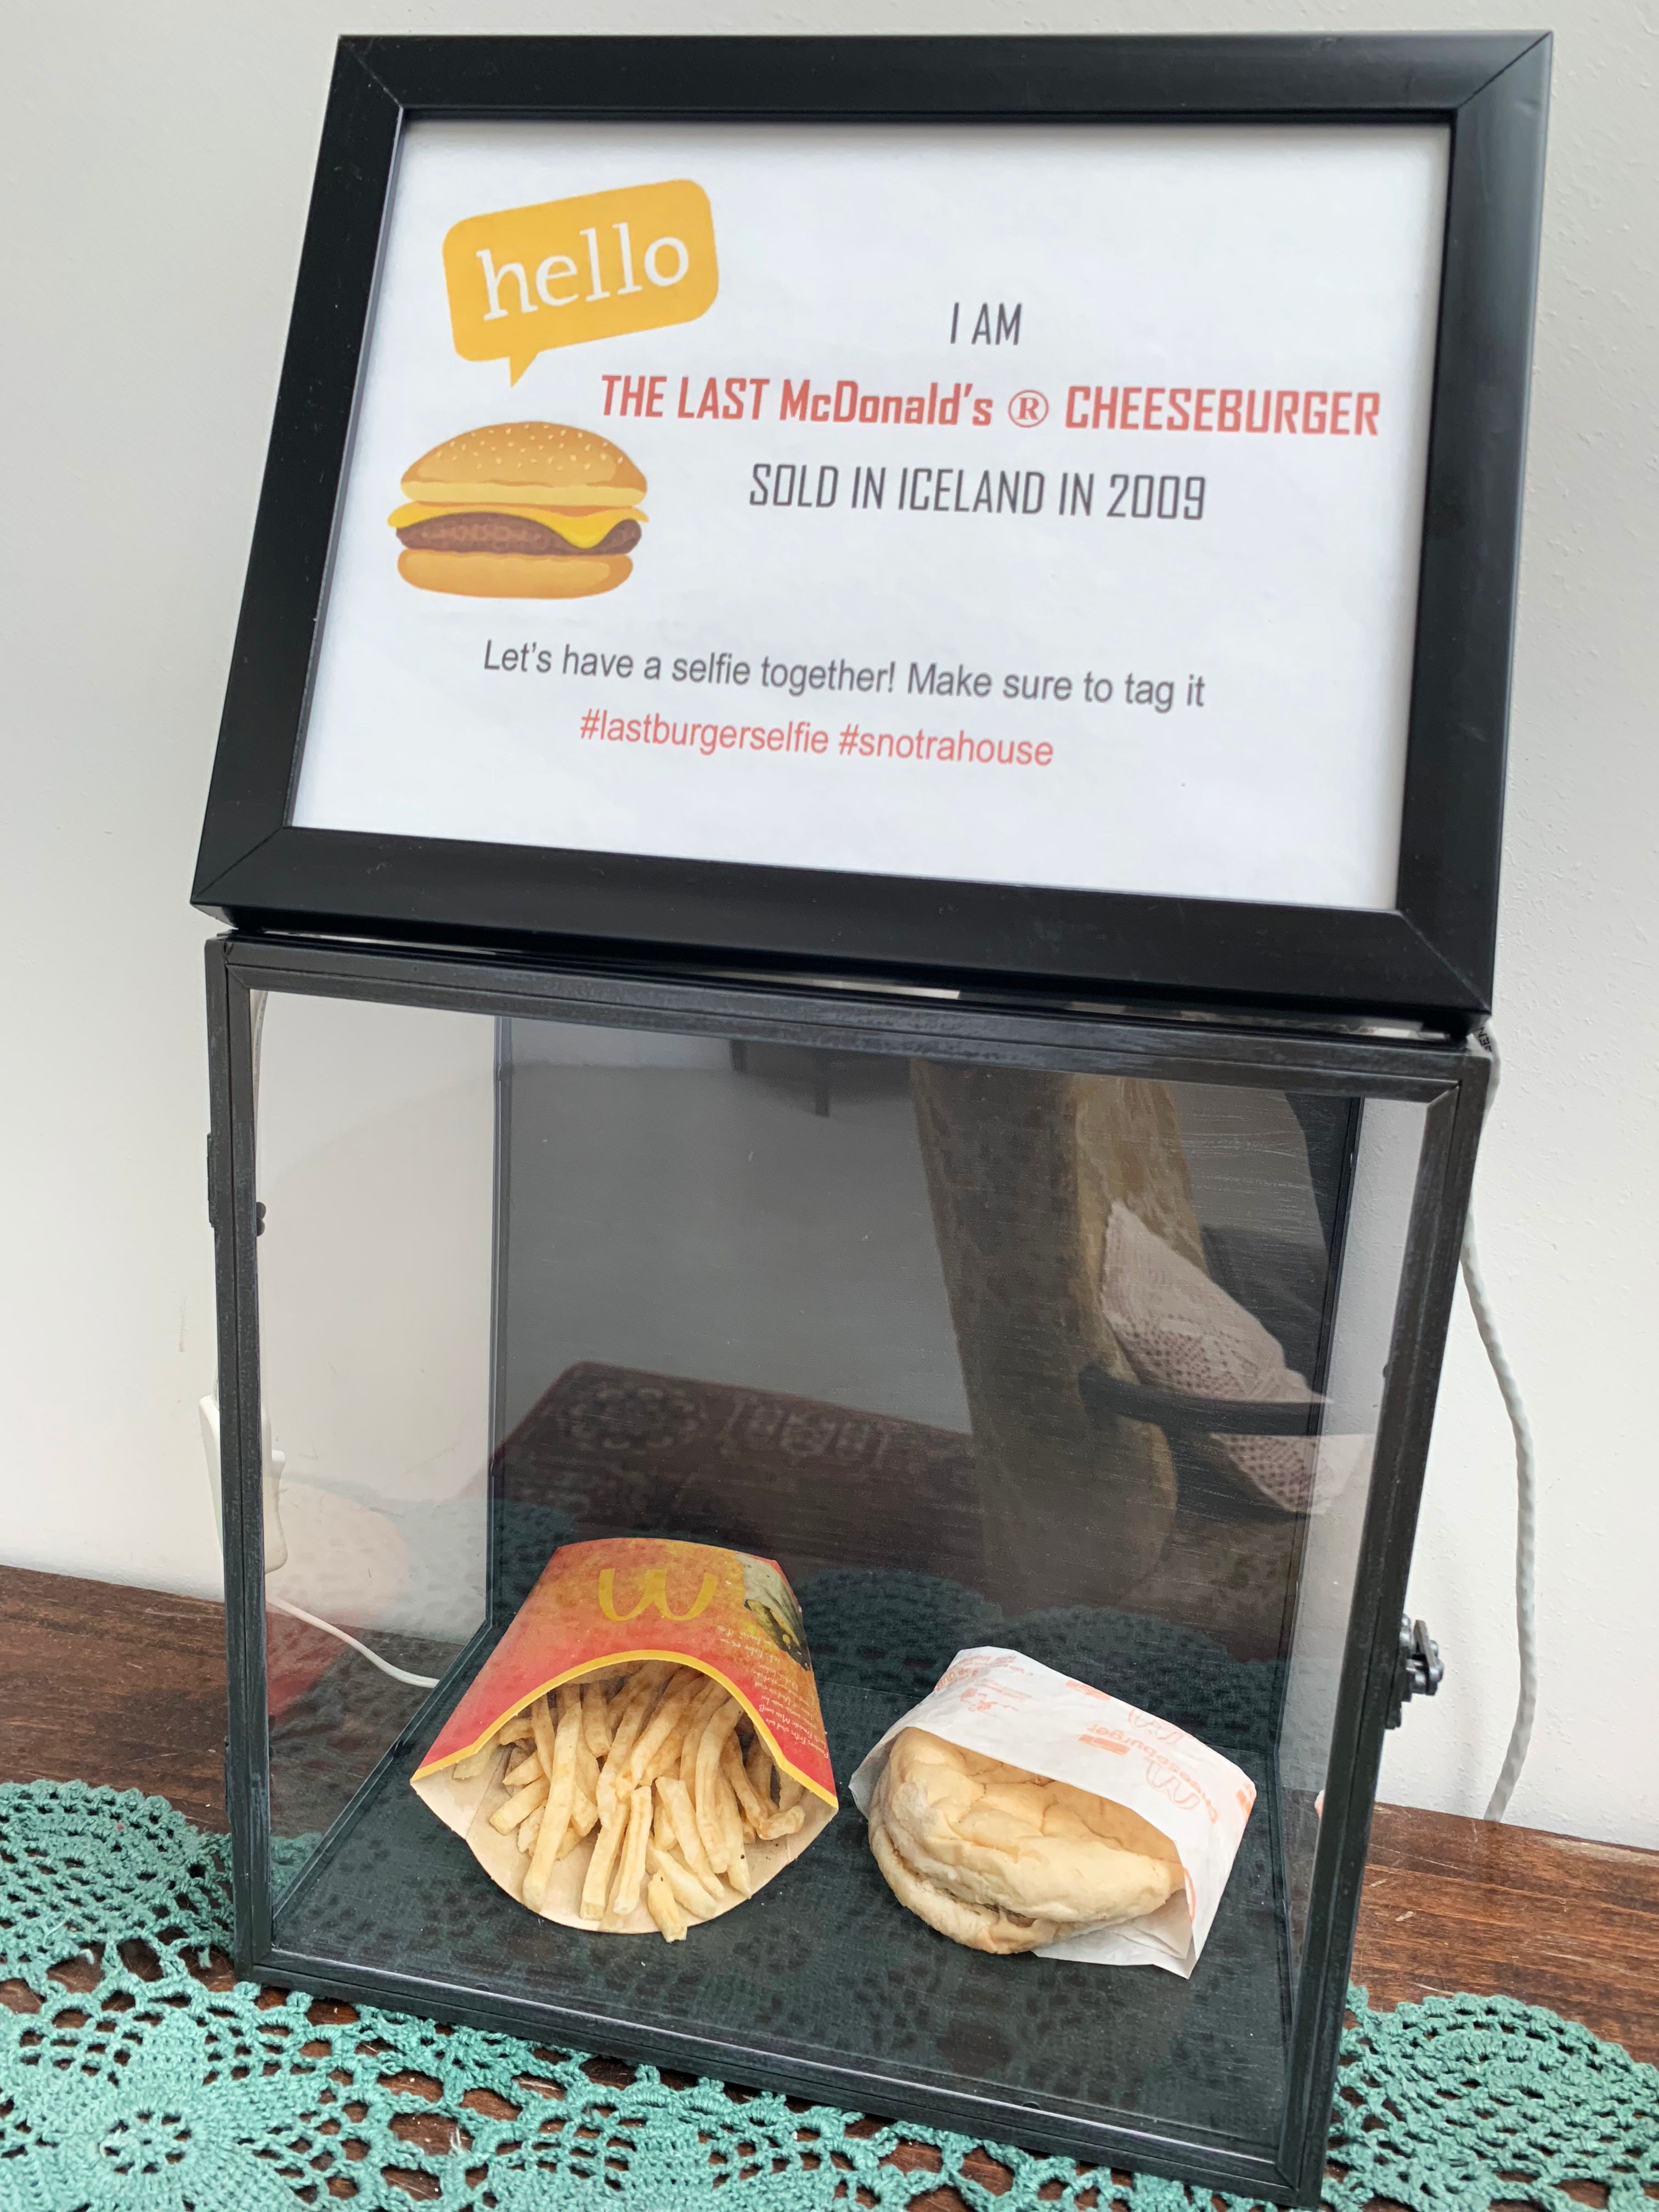 The last McDonald's cheeseburger sold in Iceland for some reason.